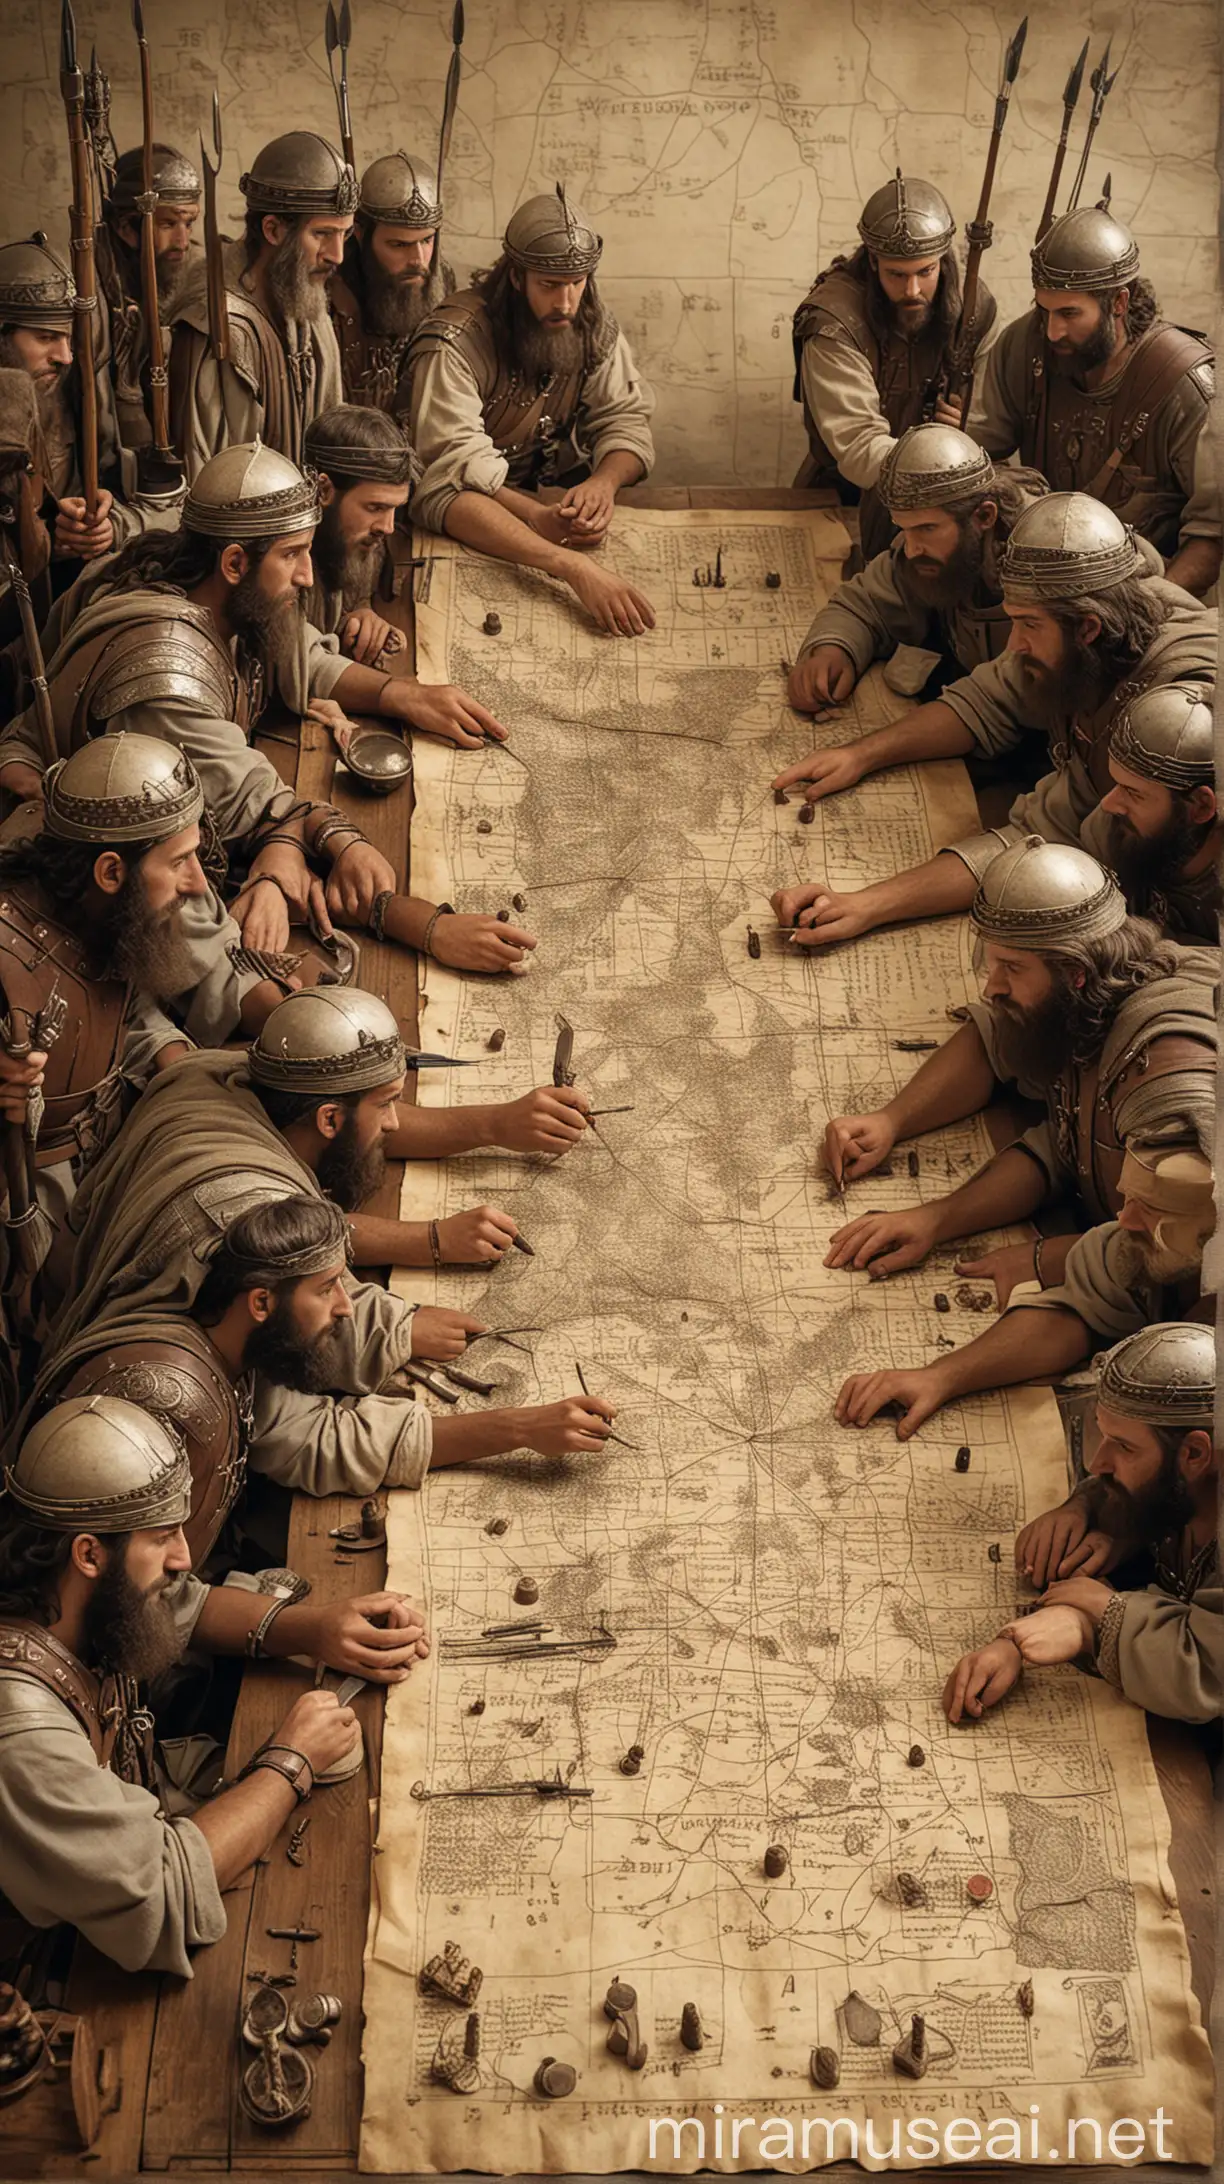 Generate an image depicting a group of ancient Hebrew soldiers strategizing around a table, with maps and scrolls spread out before them.